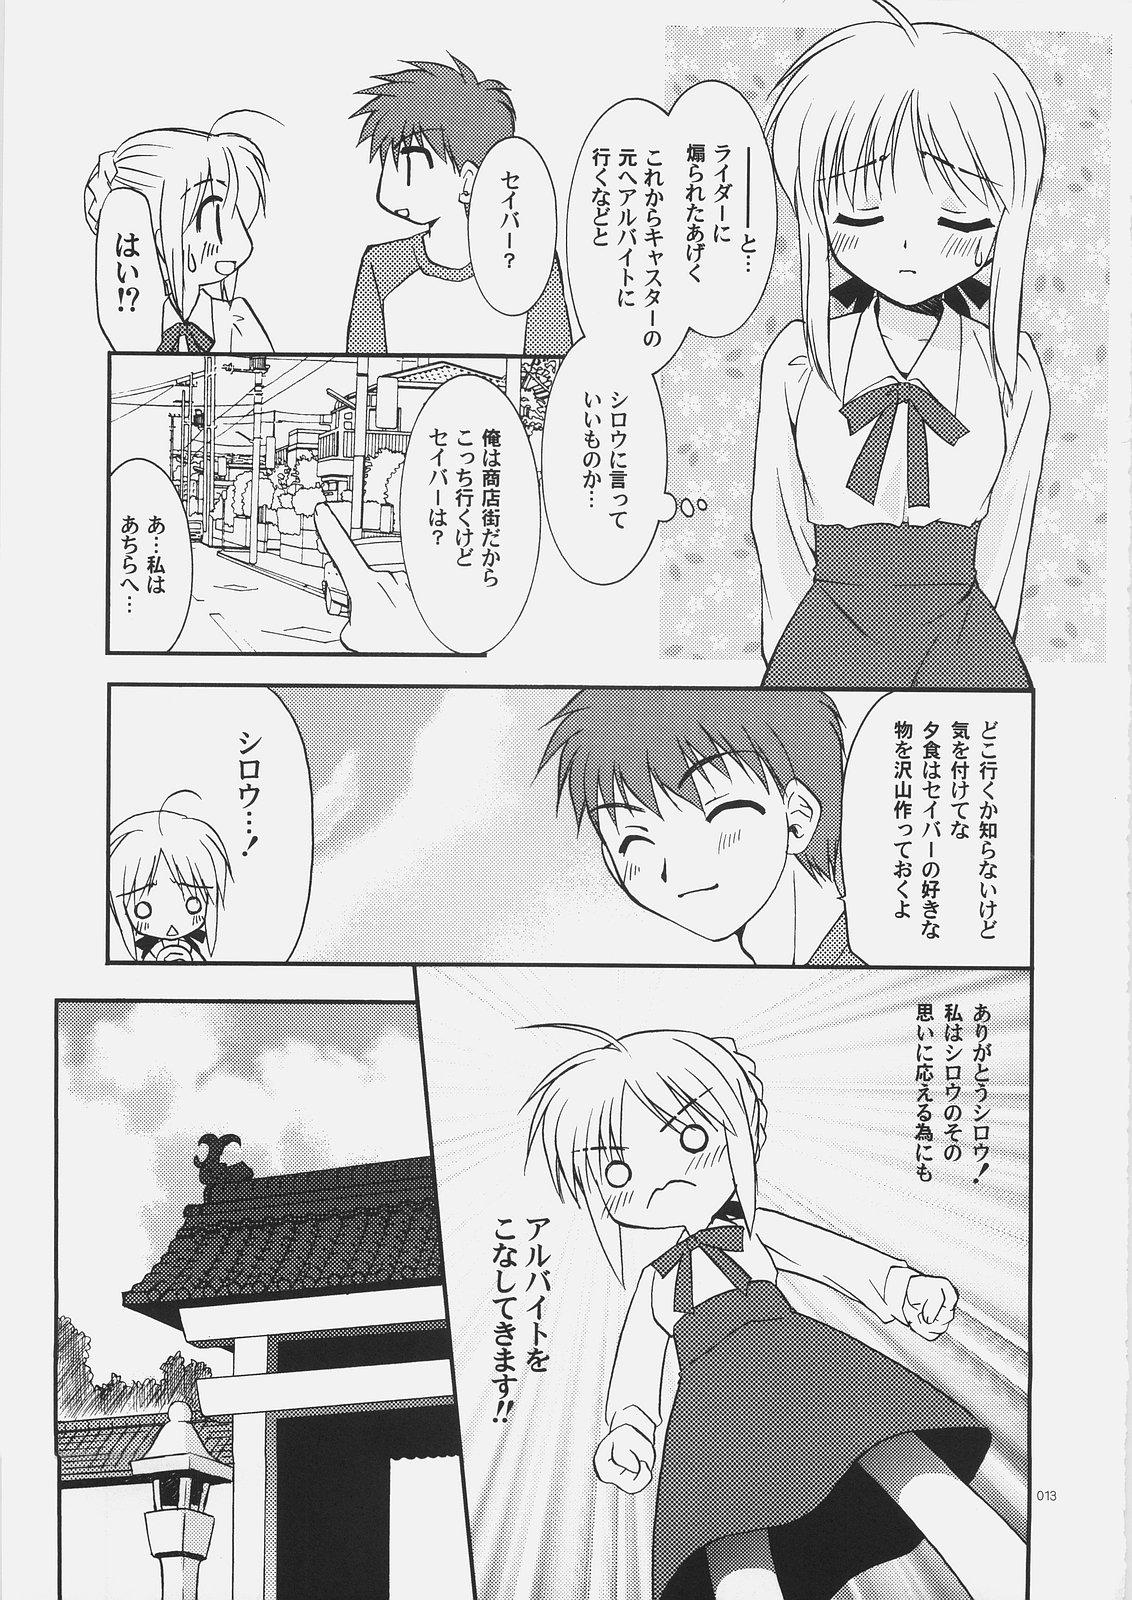 Assfingering Palette - Fate stay night Fate hollow ataraxia Striptease - Page 12